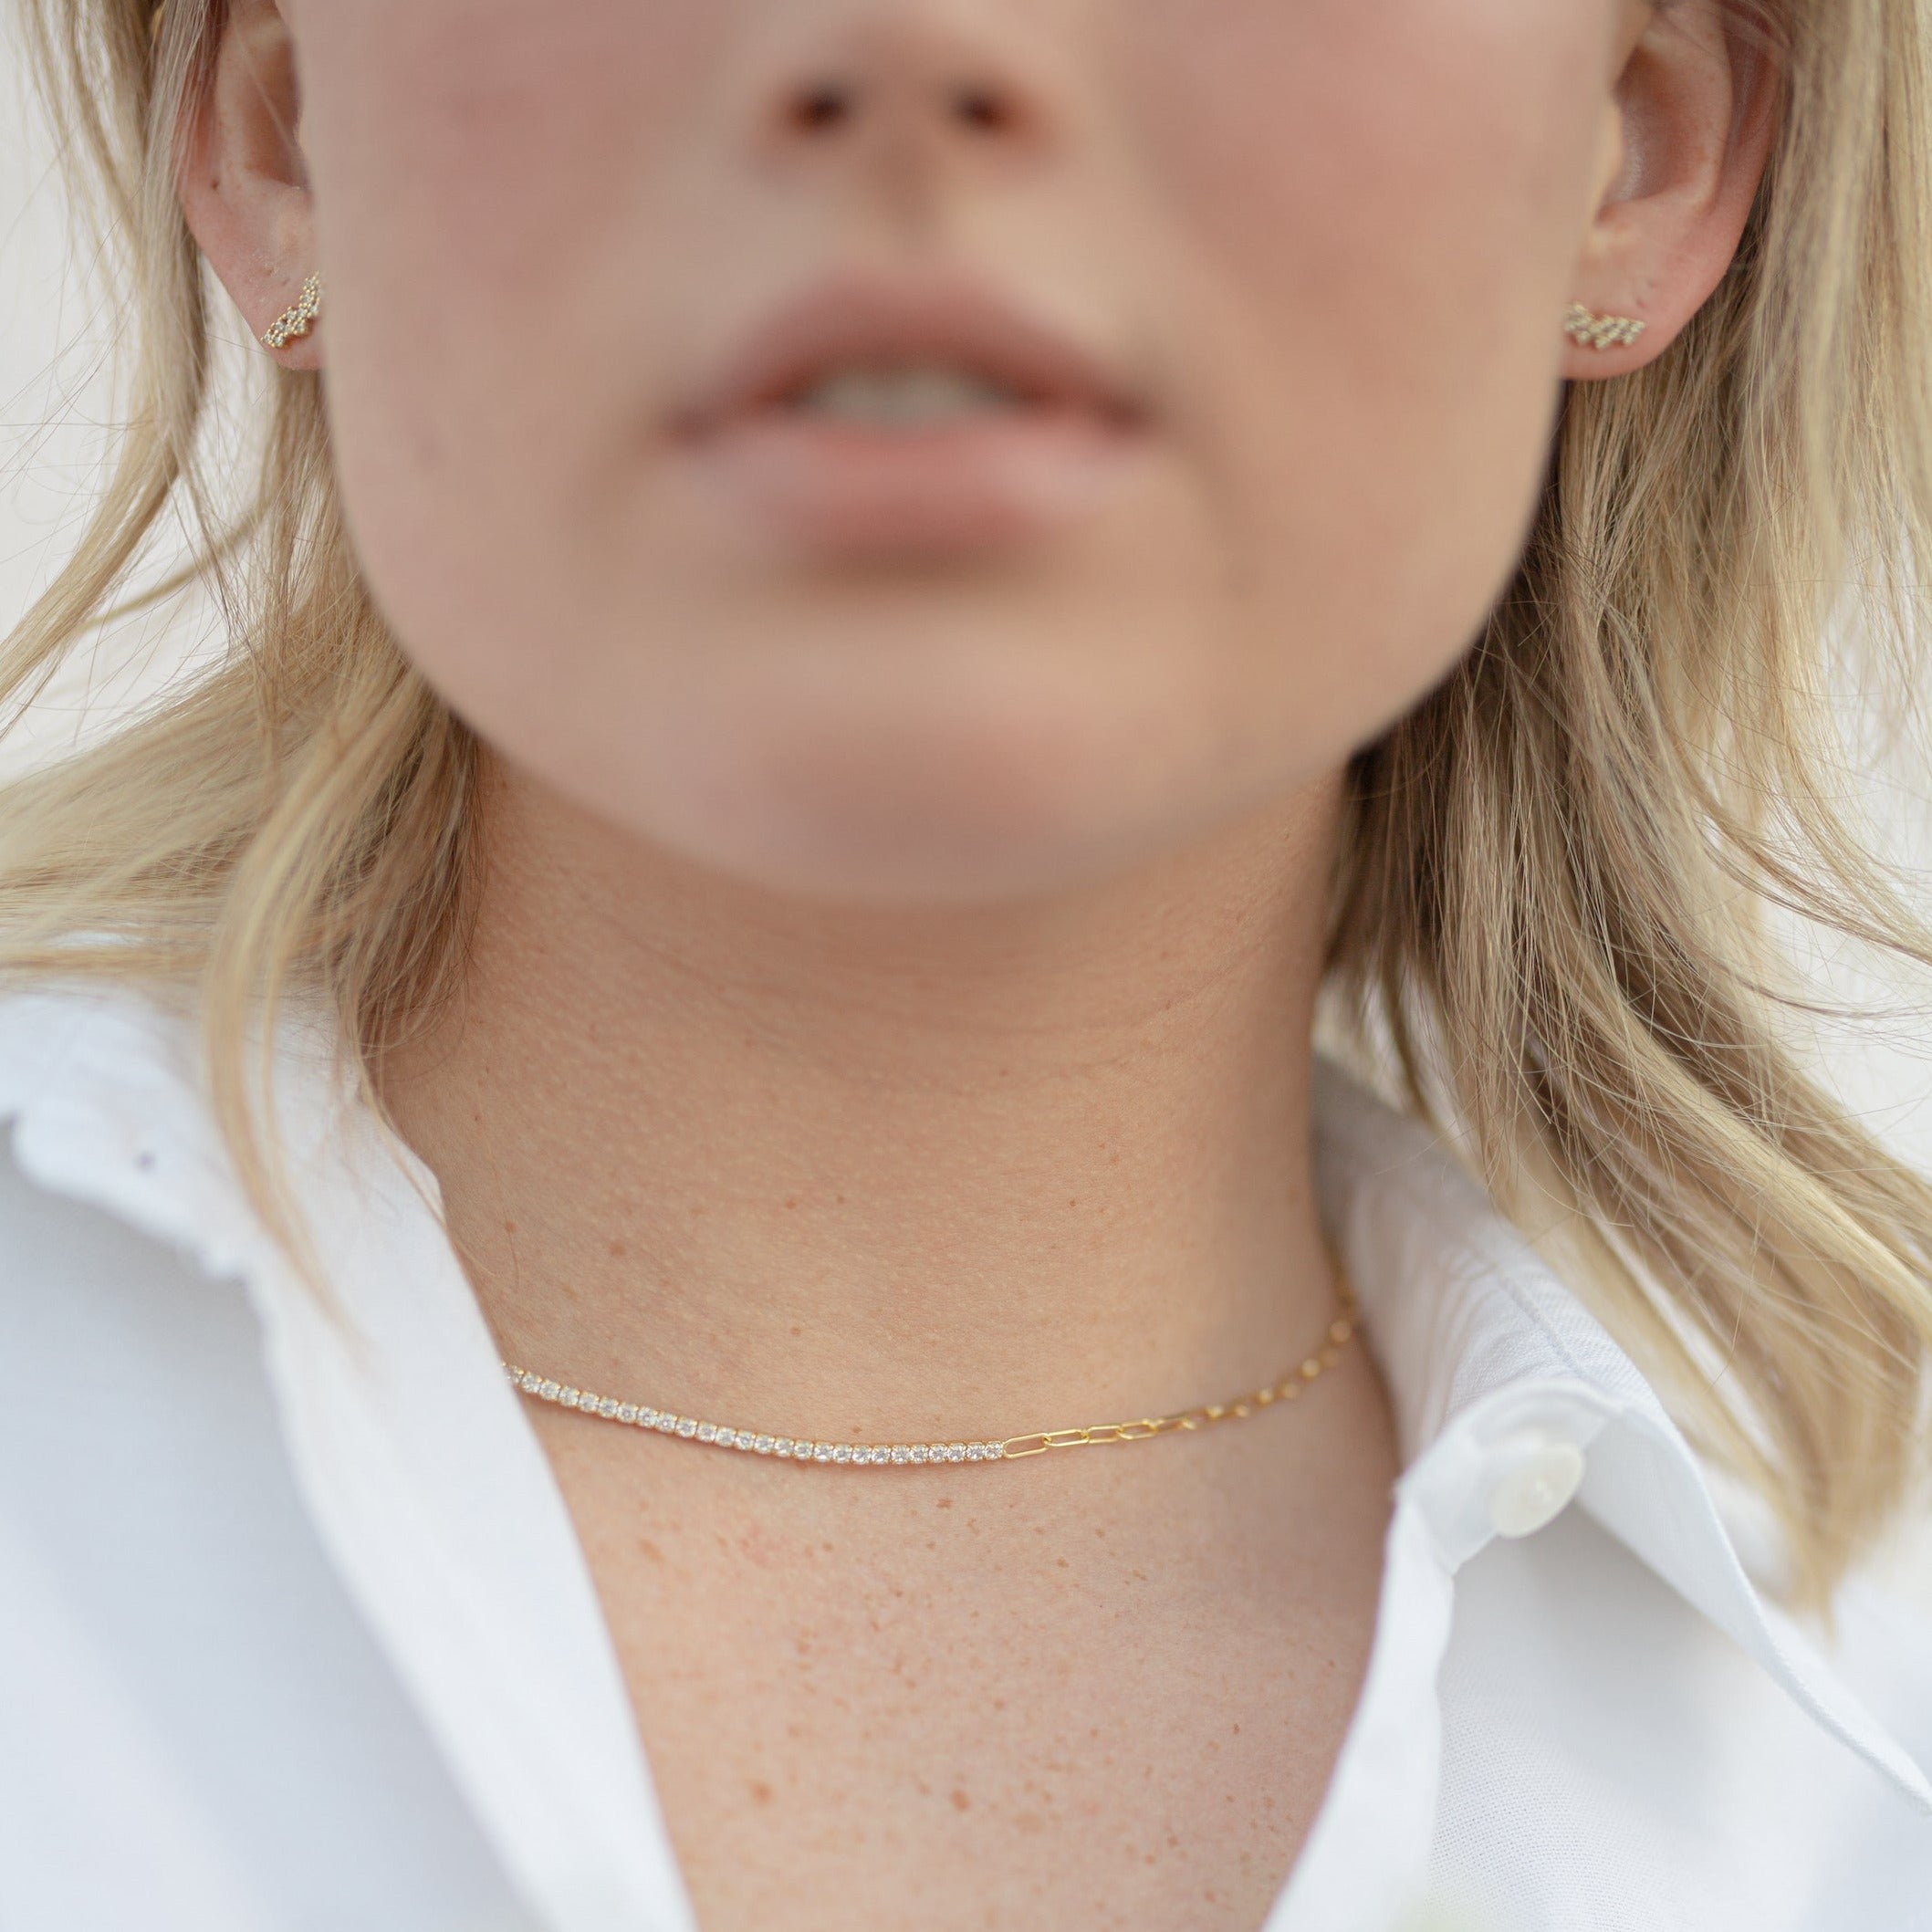 Naomi Gold Tennis Necklace with Square Link Chain - P I C N I C 